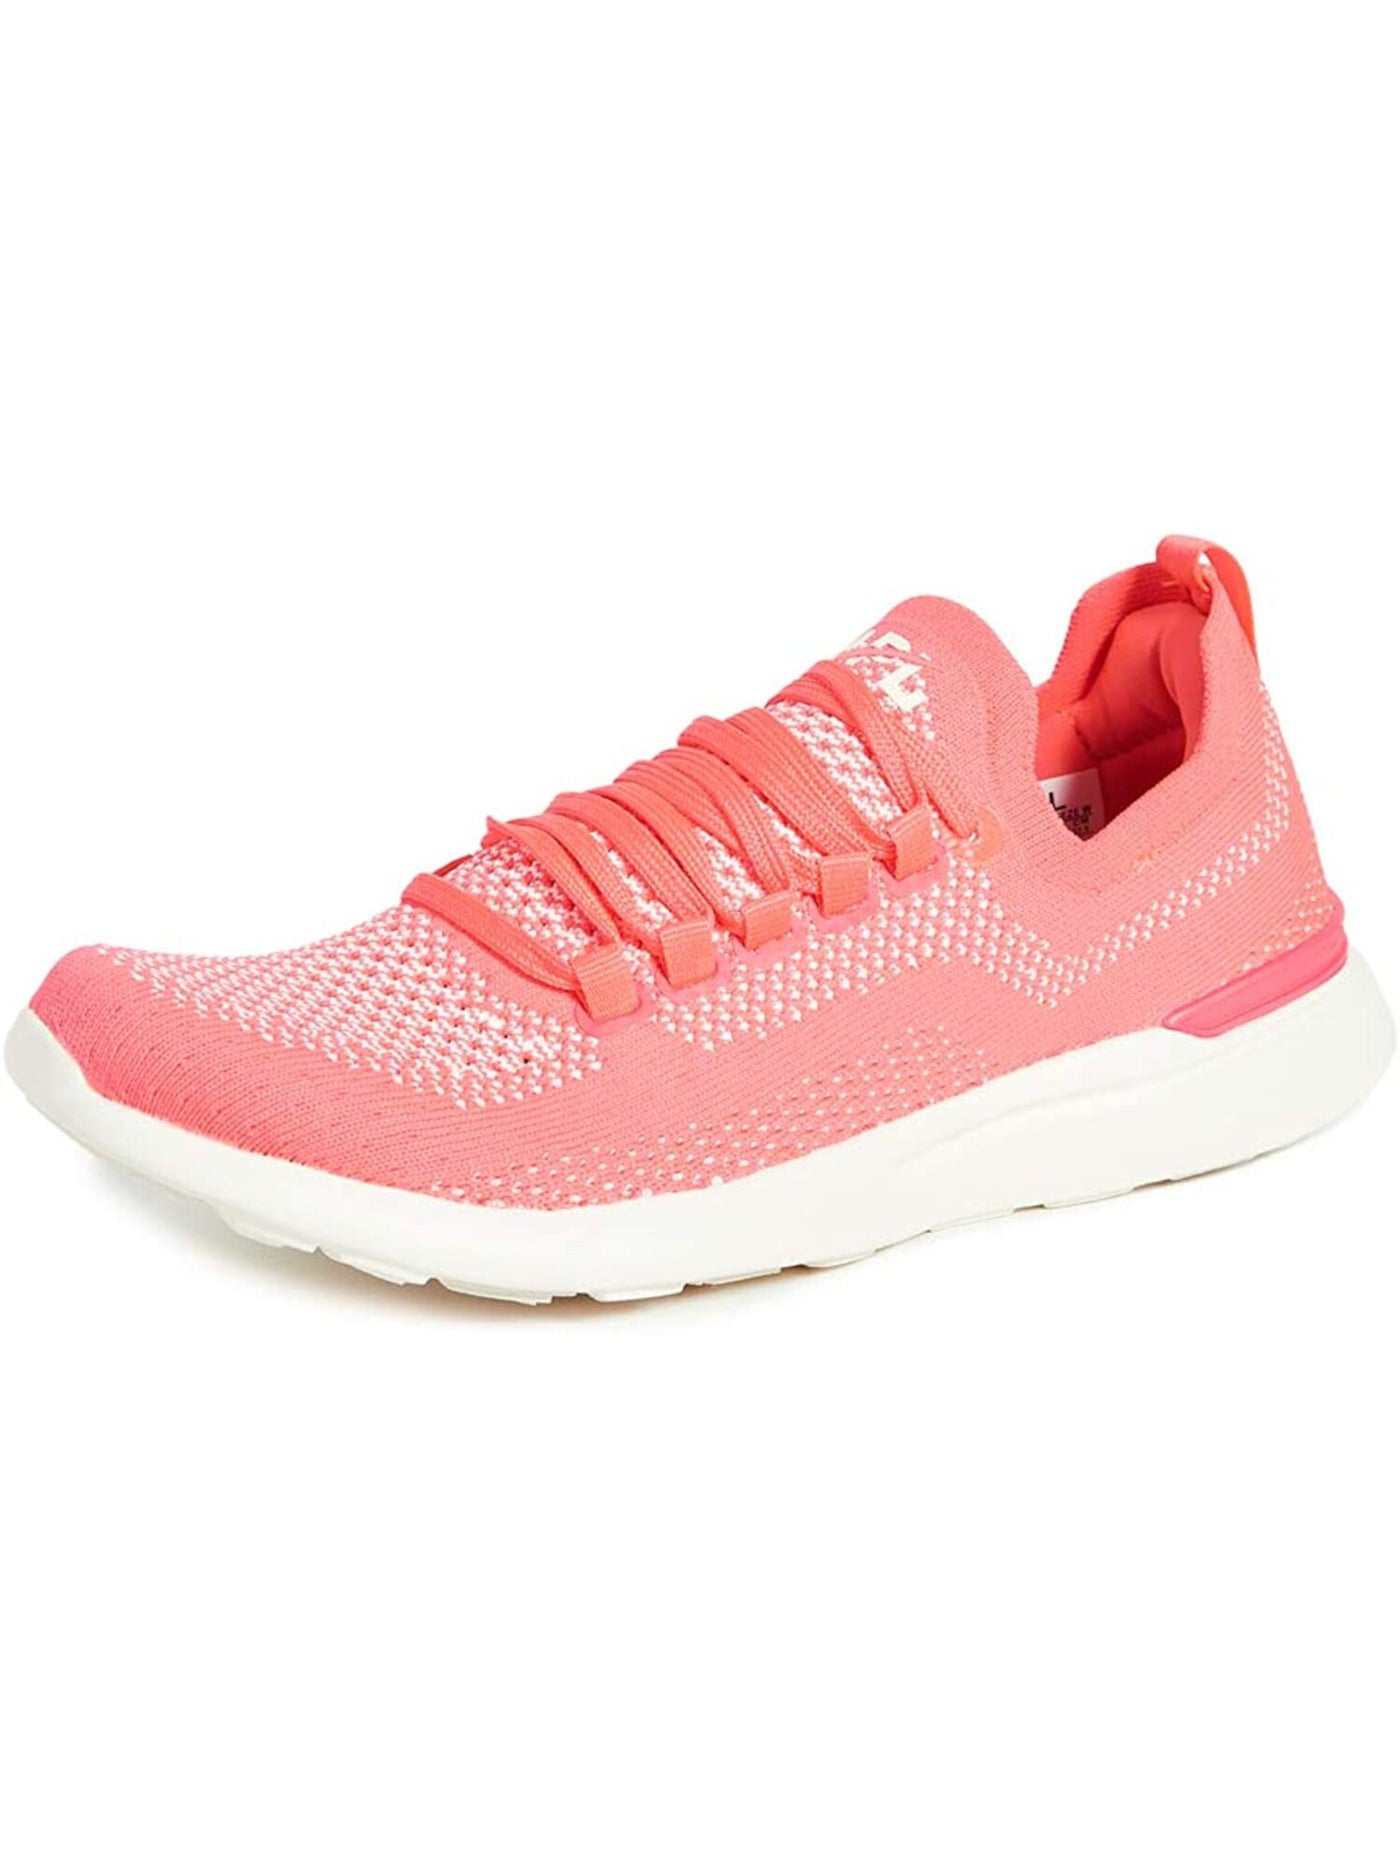 ATHLETIC PROPULSION LABS Womens Pink Removable Insole Pull Tab Cushioned Techloom Breeze Wedge Lace-Up Athletic Running Shoes 9.5